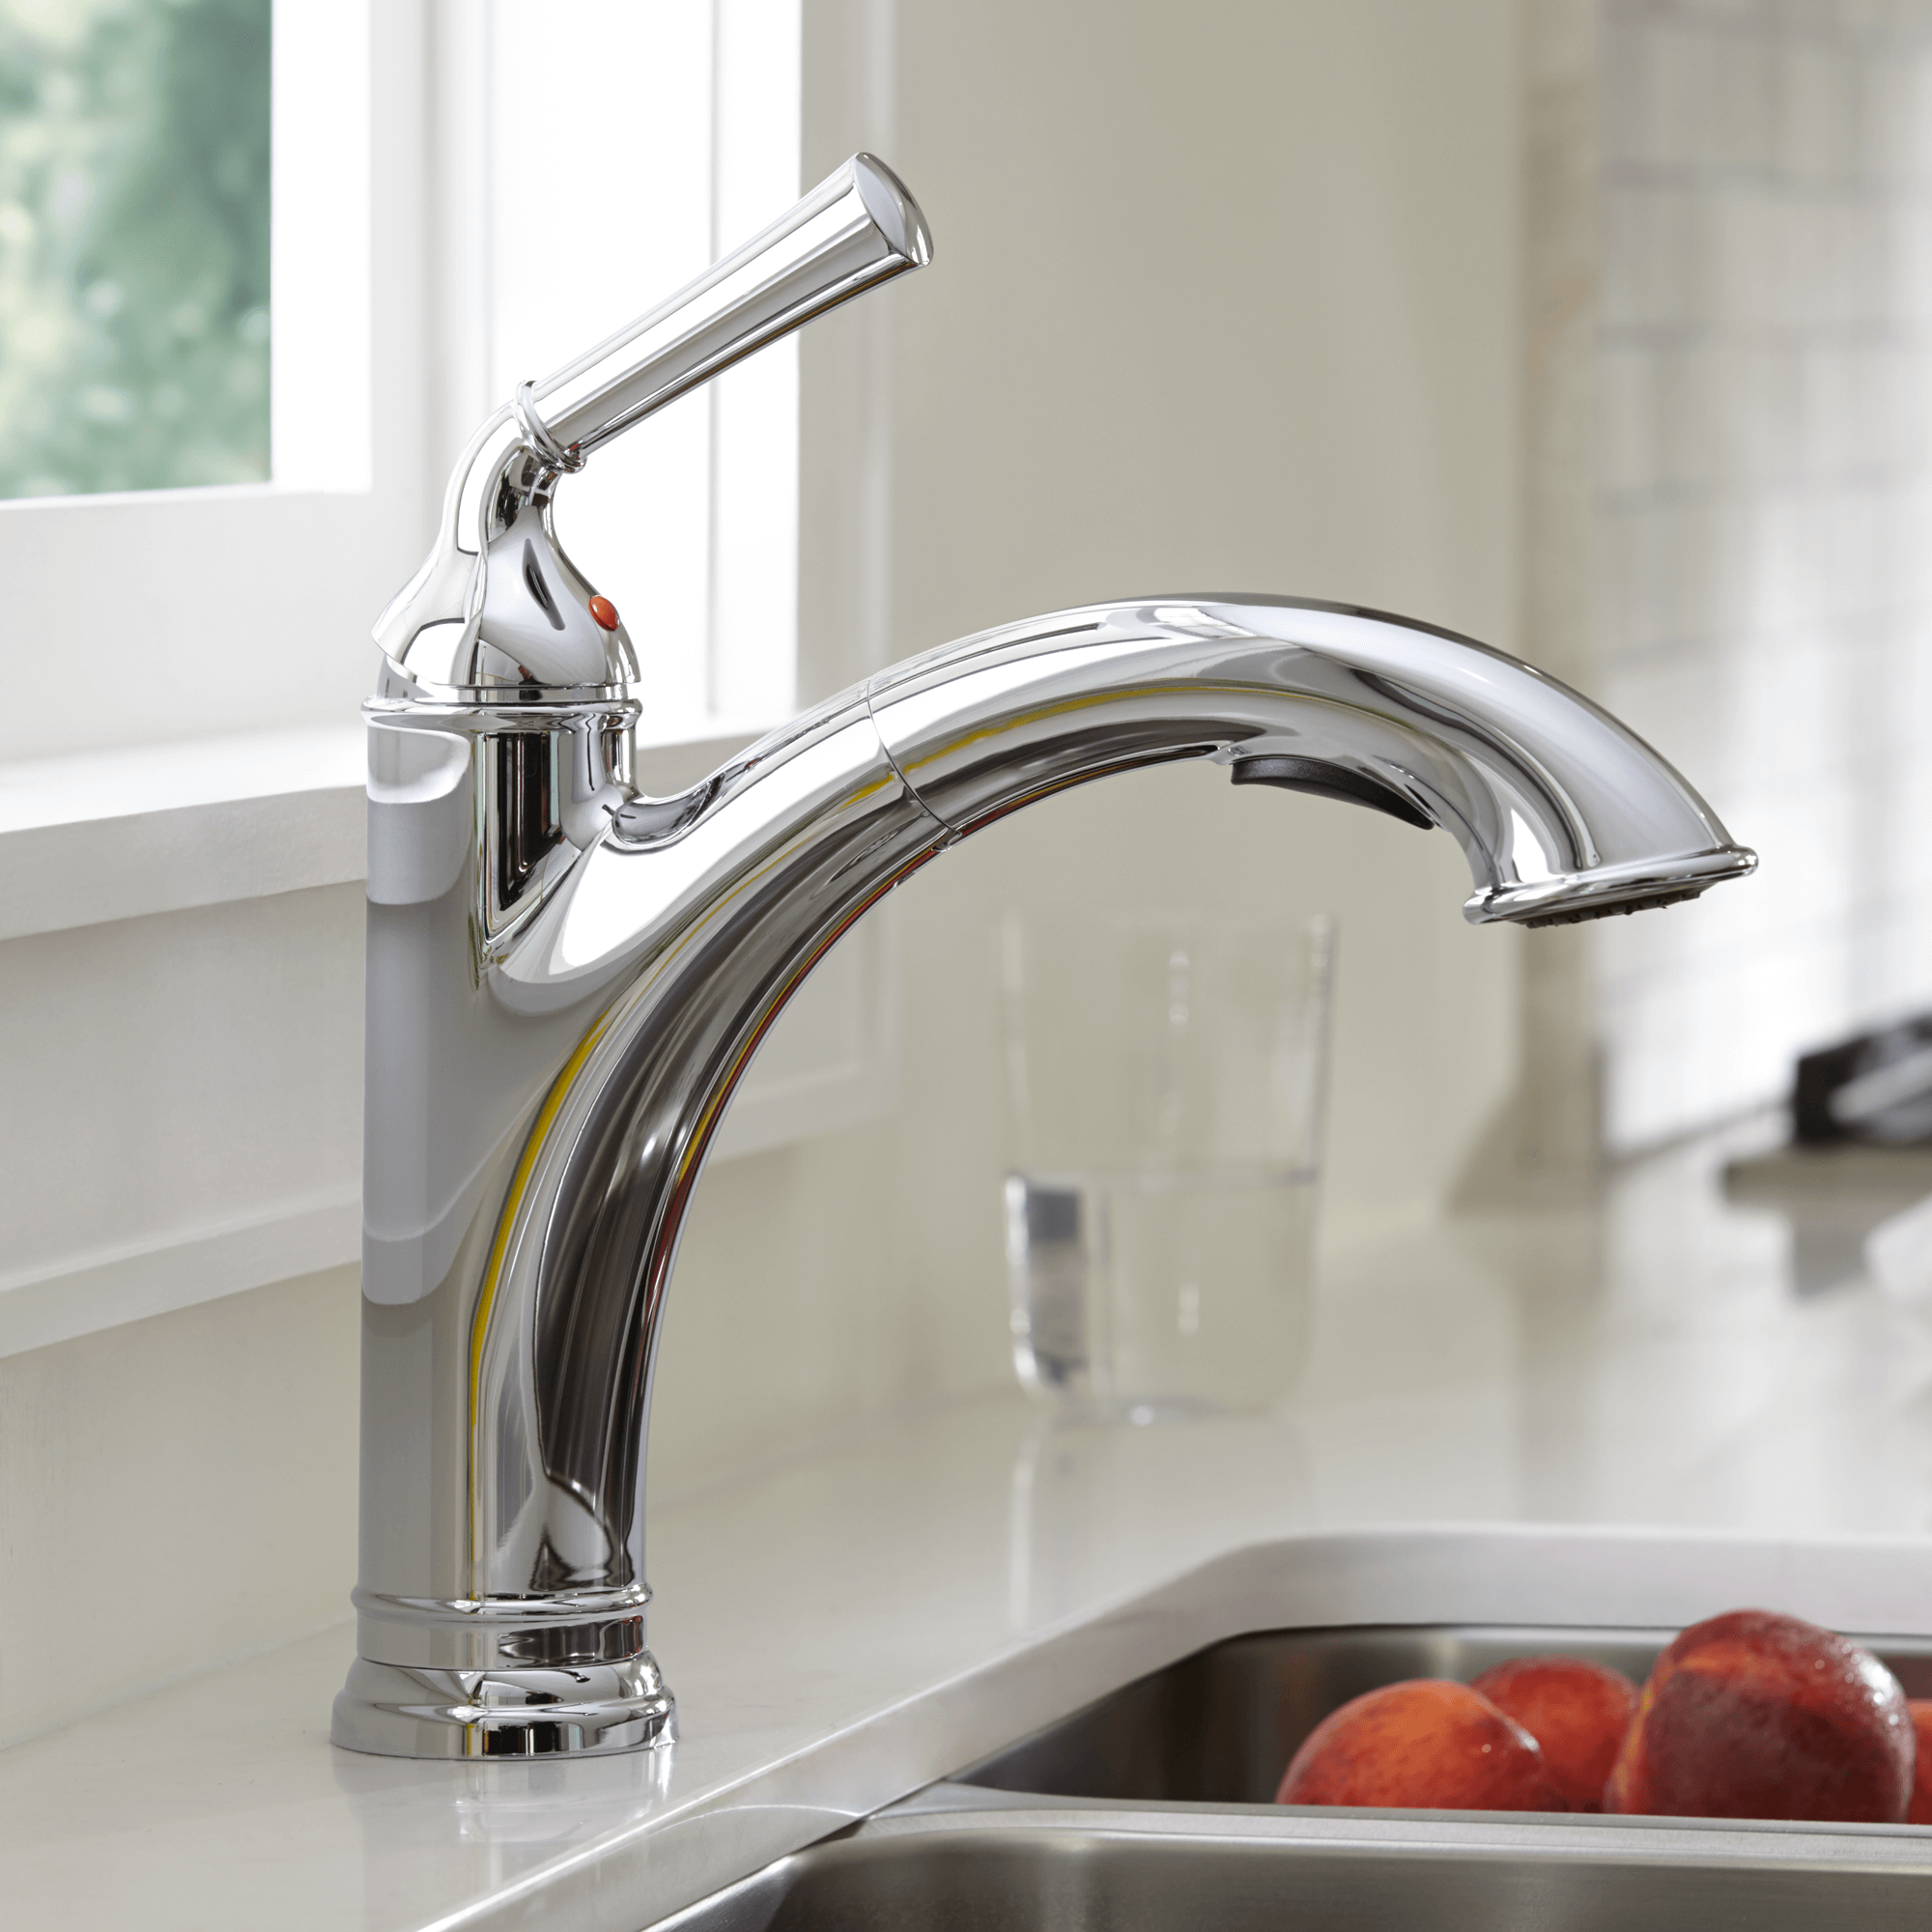 Chrome Kitchen Faucet / Chrome/Black/Brushed Pull Out Kitchen Faucet